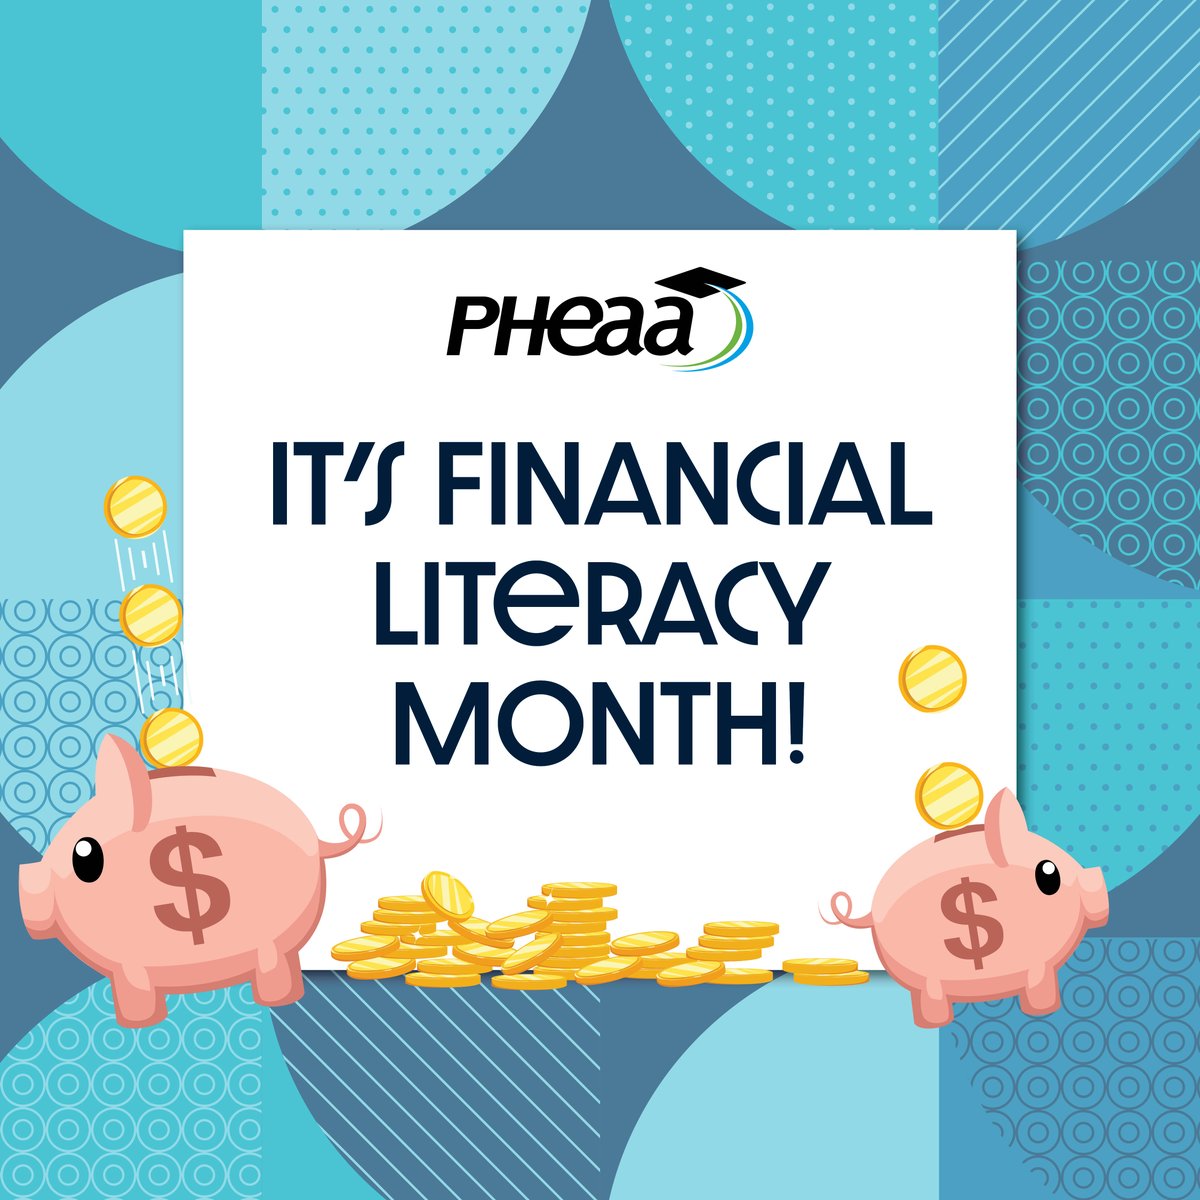 #FinanicalLiteracyMonth is no joke and a key factor to an affordable education starts with wise spending and saving habits 🐖💵 So follow along this month for tips and resources that'll prepare you for a career that helps minimize debt and maximize the opportunities for success.